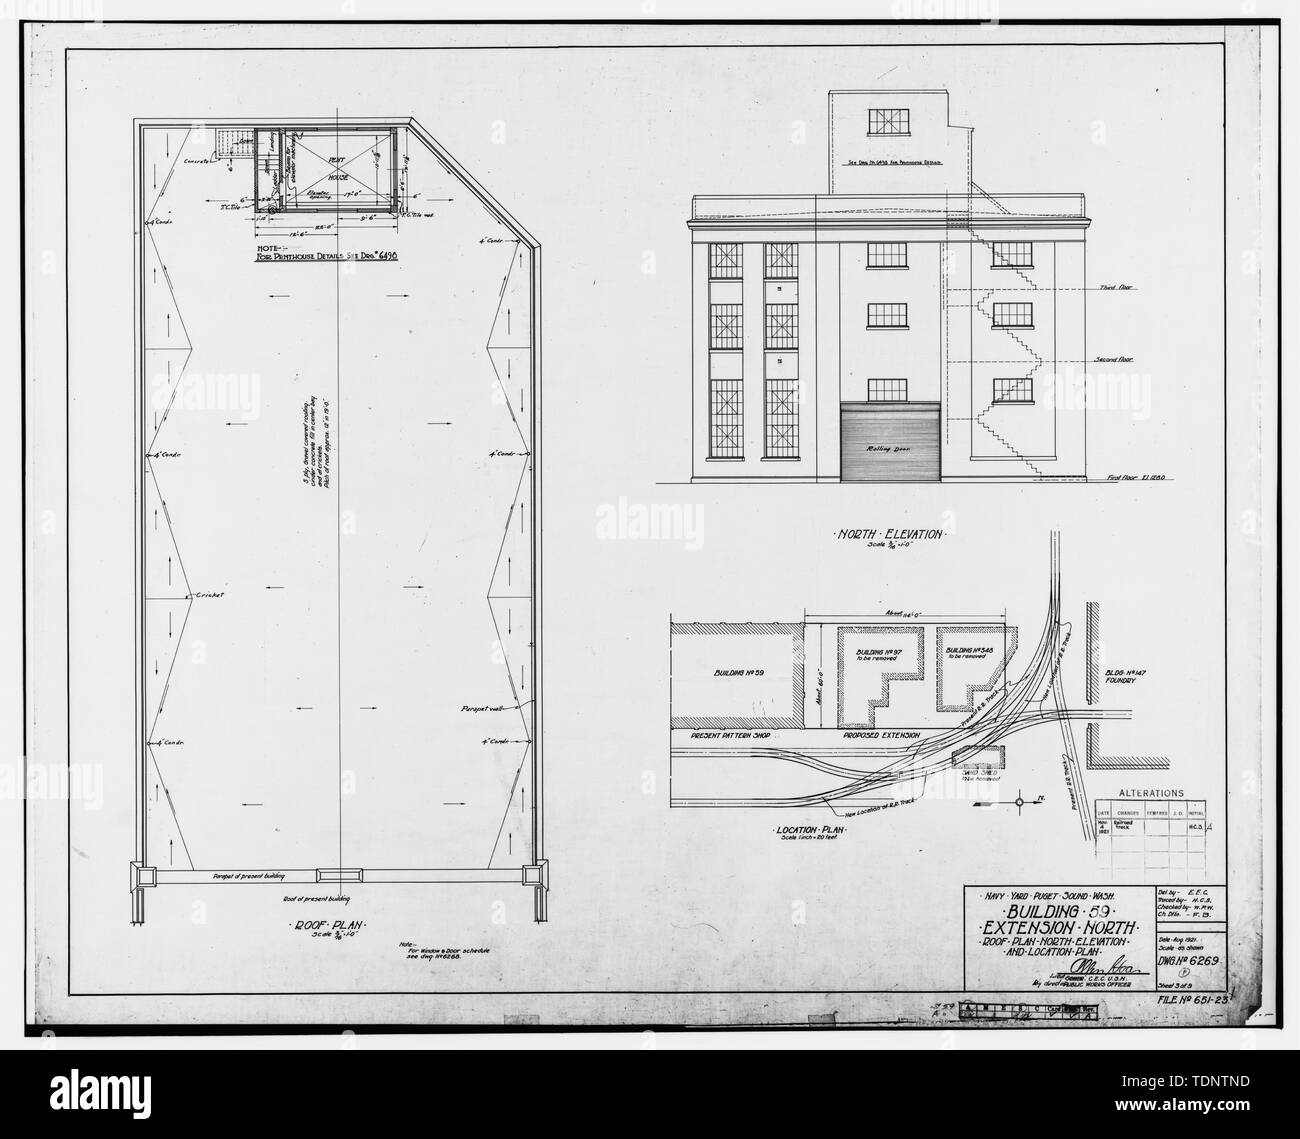 Photocopy of 1921 architectural drawing titled- BUILDING 59, EXTENSION NORTH. ROOF PLAN, NORTH ELEVATION AND LOCATION PLAN. Drawing No. 6259, File No. 651-23. - Puget Sound Naval Shipyard, Pattern Shop, Farragut Avenue, Bremerton, Kitsap County, WA Stock Photo